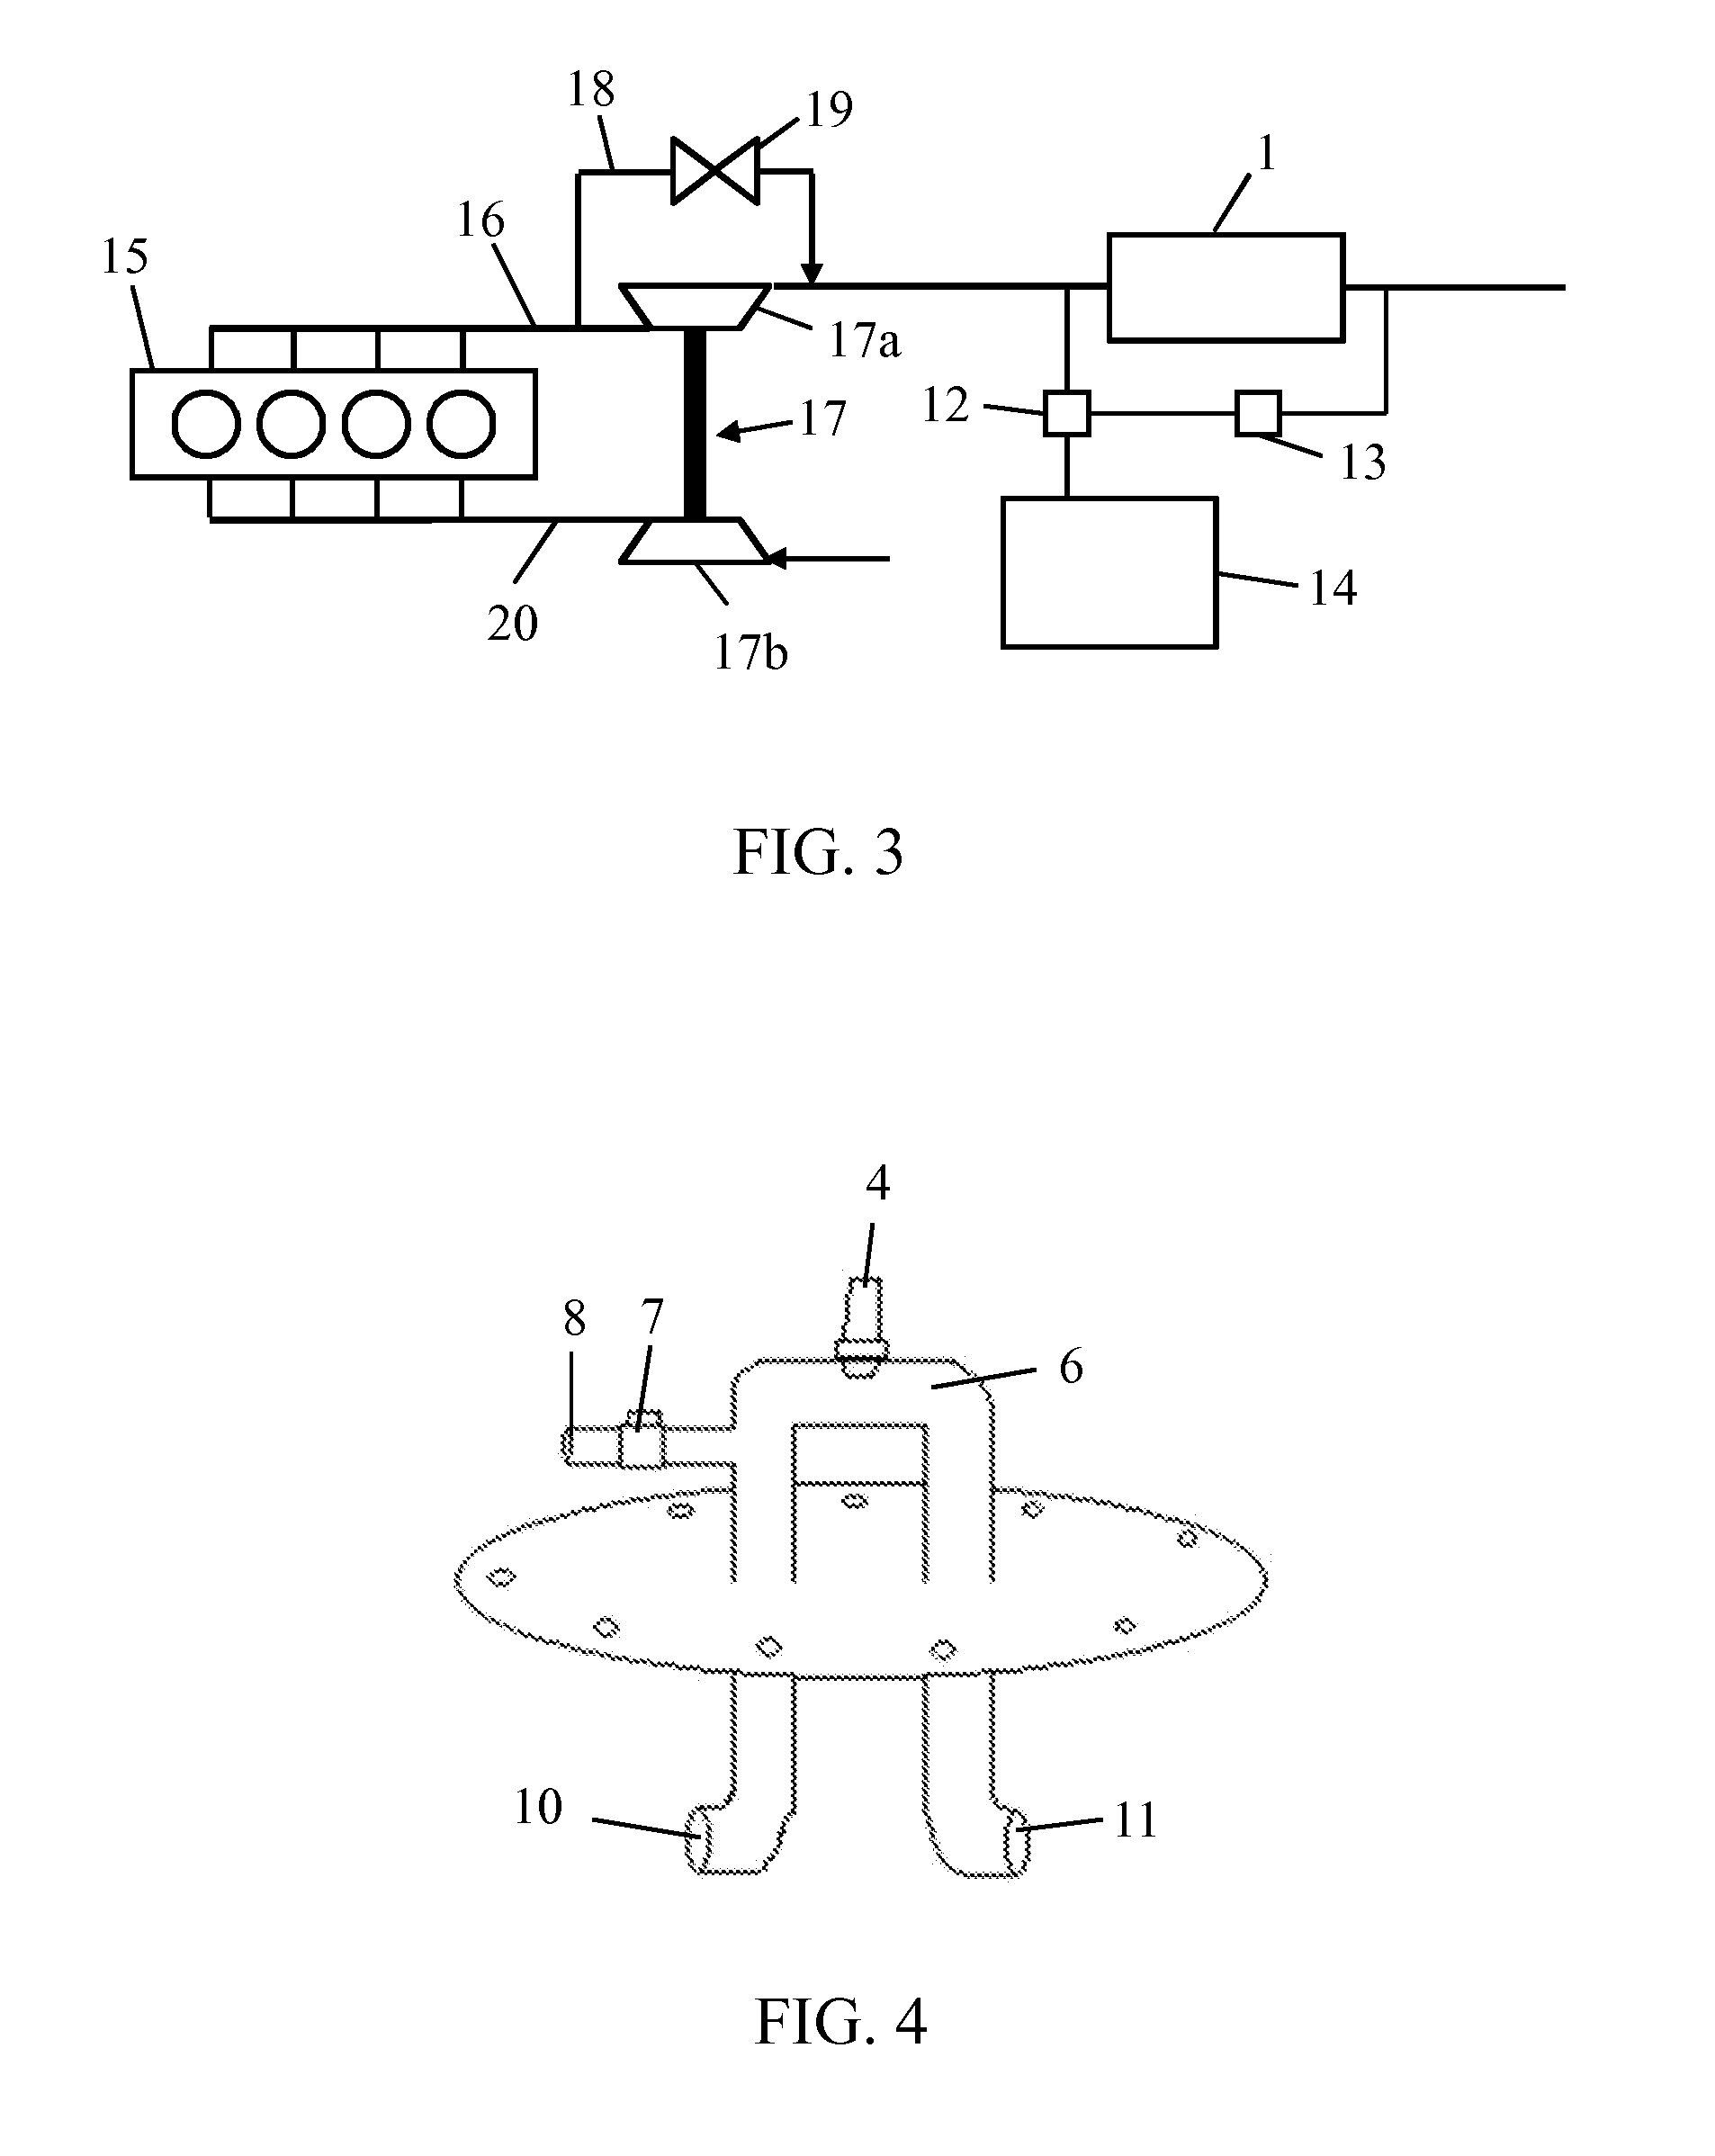 Control method and arrangement for selective catalytic reduction